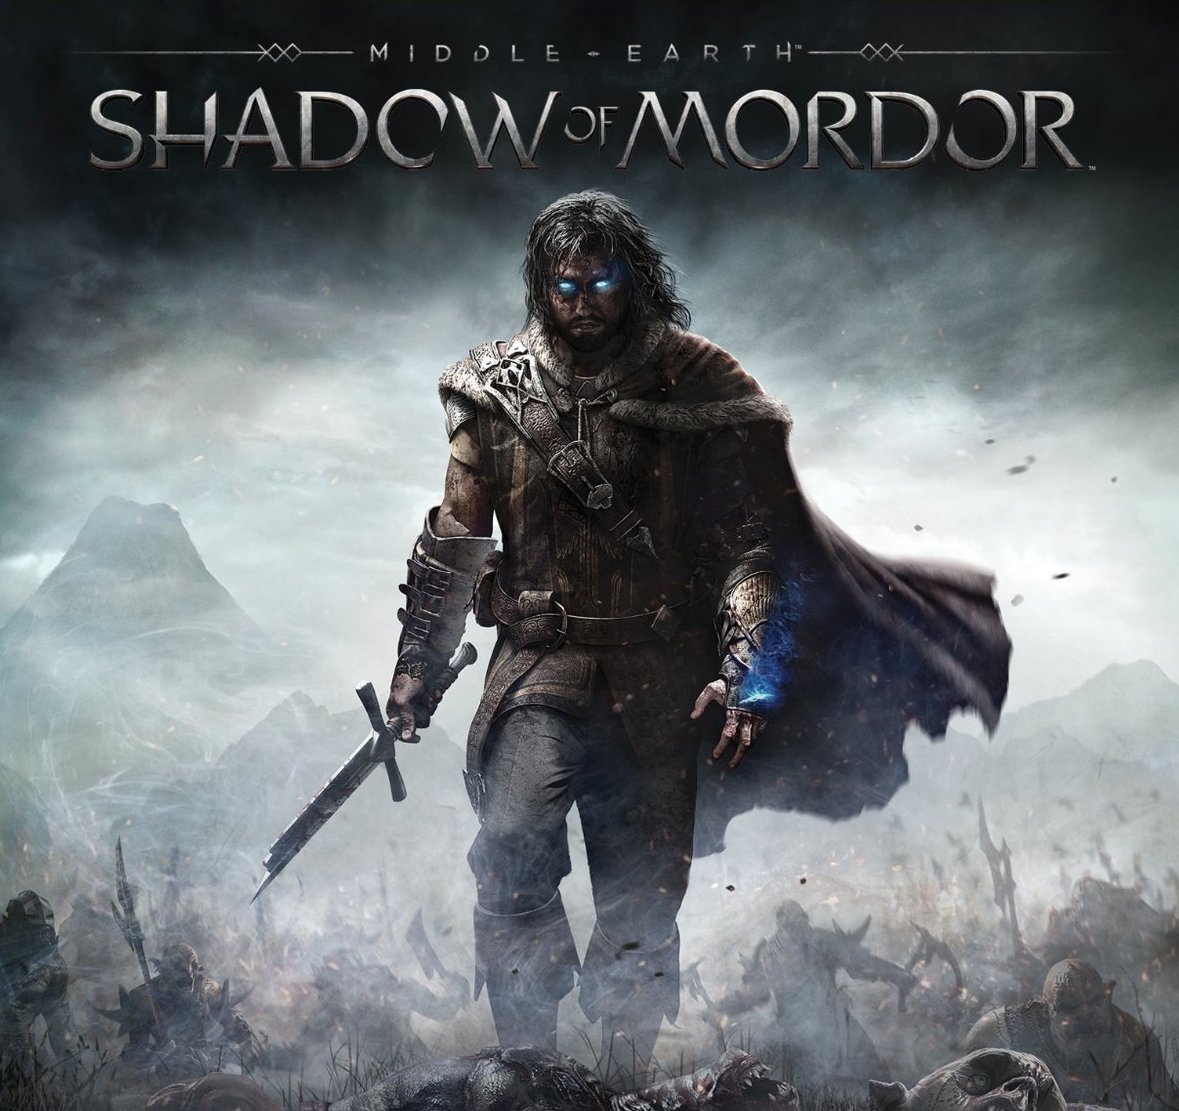 Games/Apps: Shadow of Mordor $50 (Reg. $60), $50 Xbox Gift Card for $40 ...